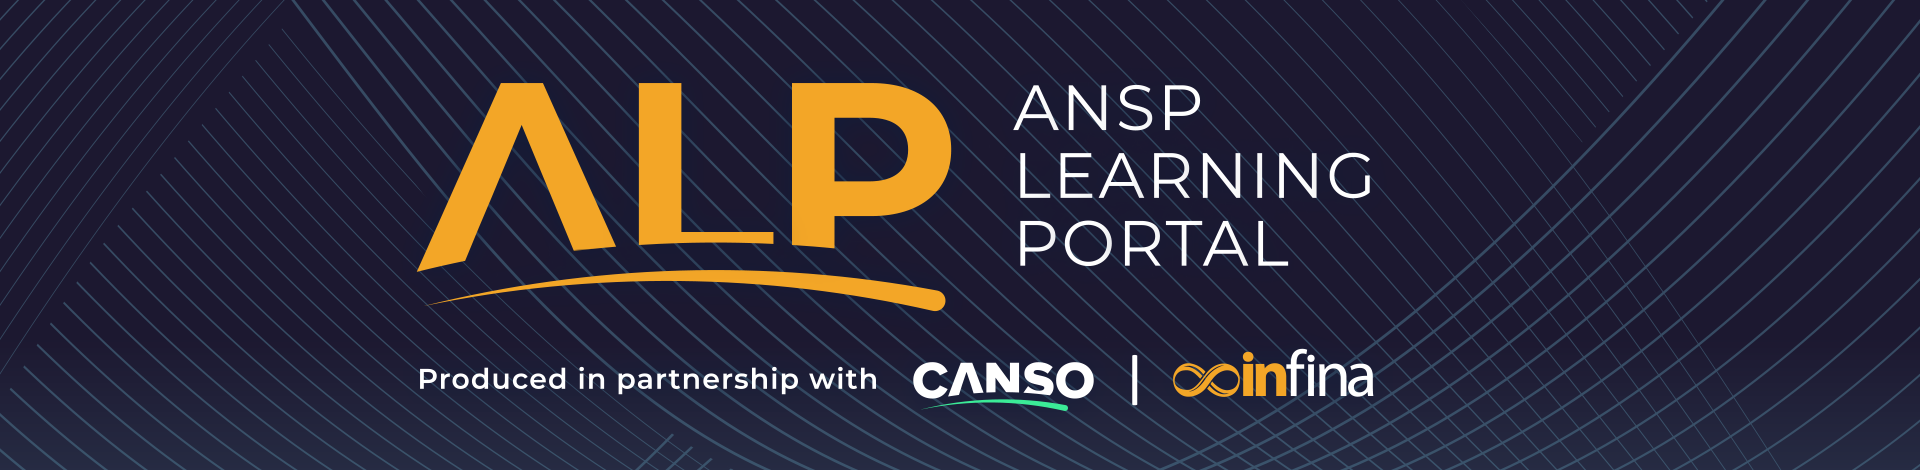 ANSP Learning Portal in Partnership with CANSO text logo over dark blue stylized background with decorative lines